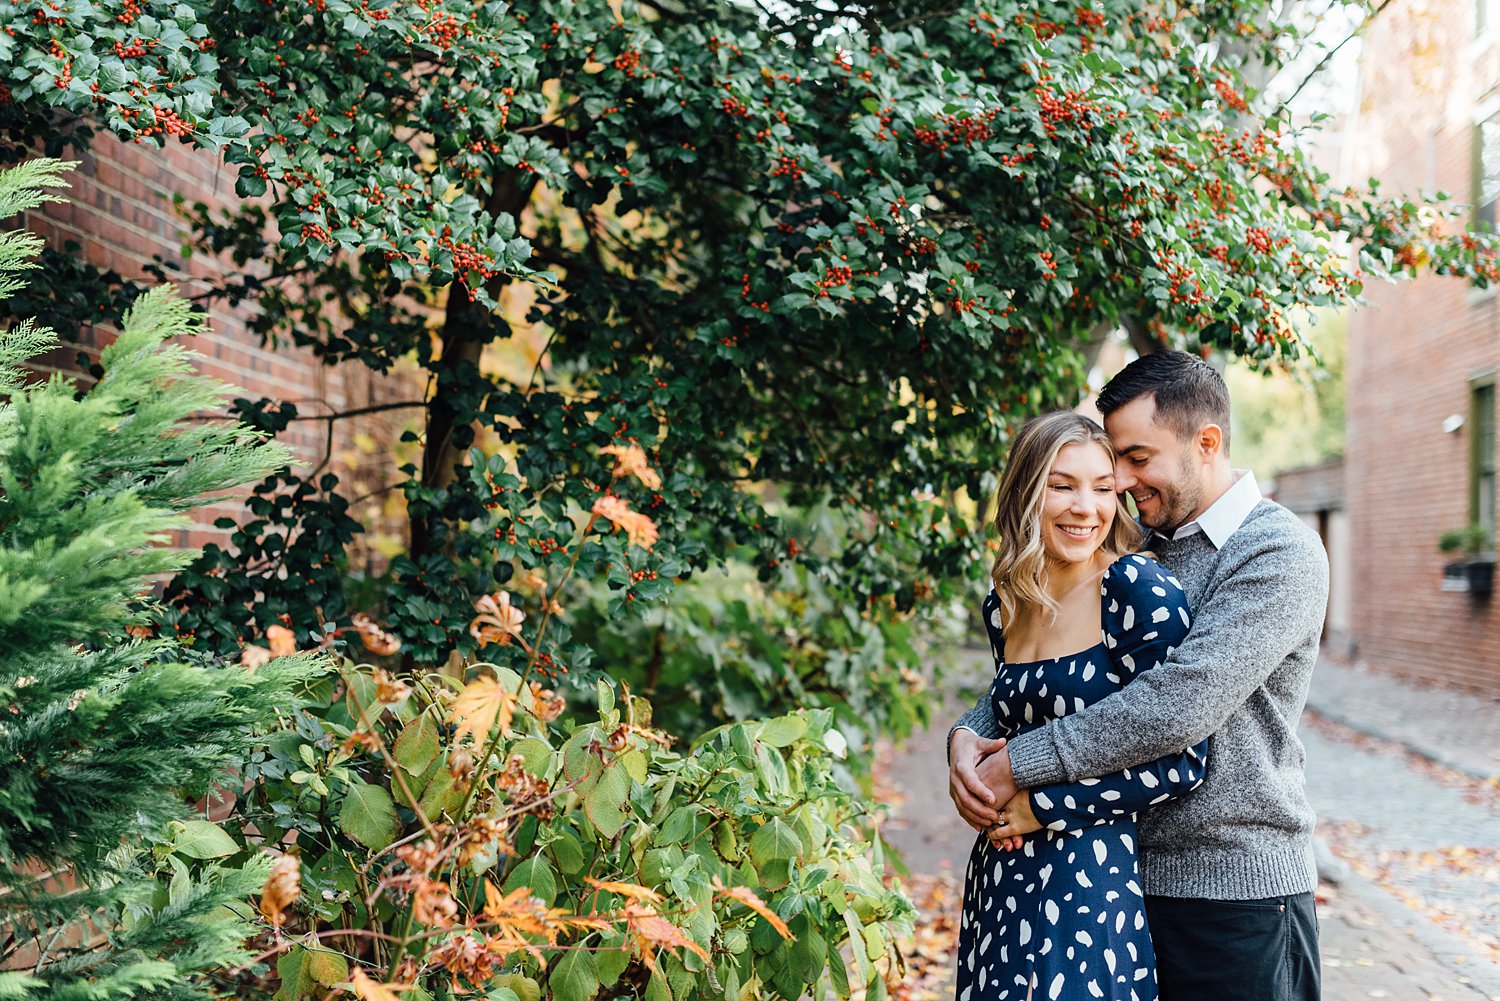 Shelby + Tim - Old City Engagement Session - Olney Maryland Engagement Photographer - Alison Dunn Photography photo